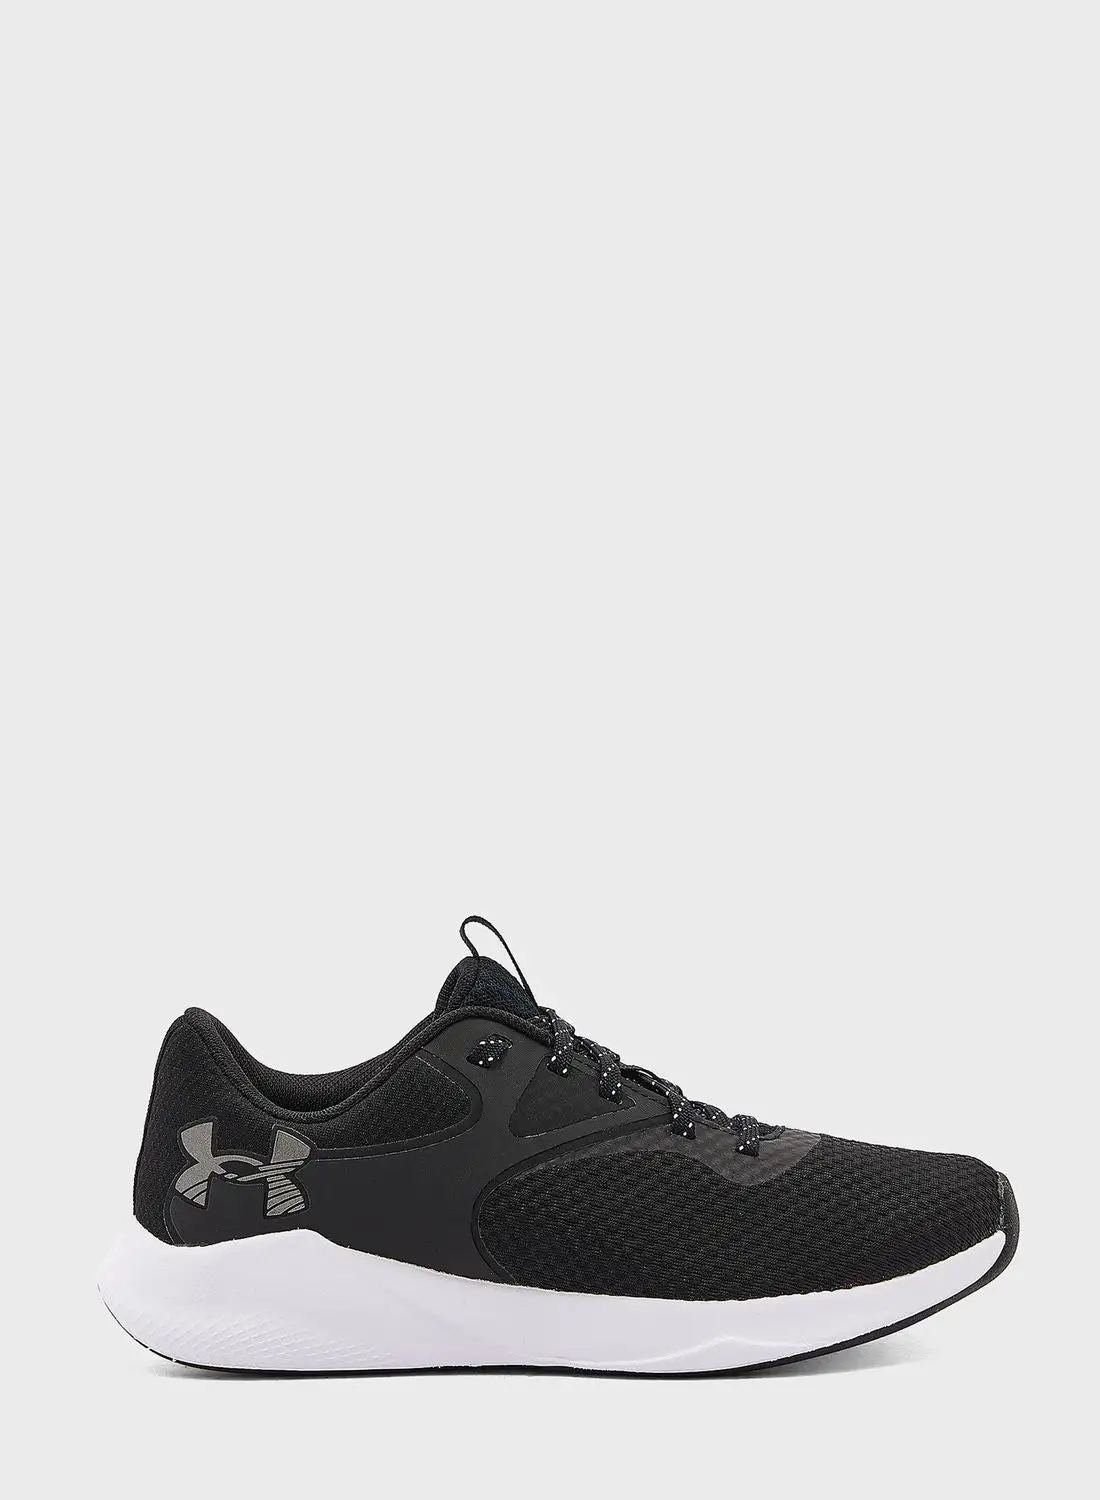 UNDER ARMOUR Charged Aurora 2 Training Shoes